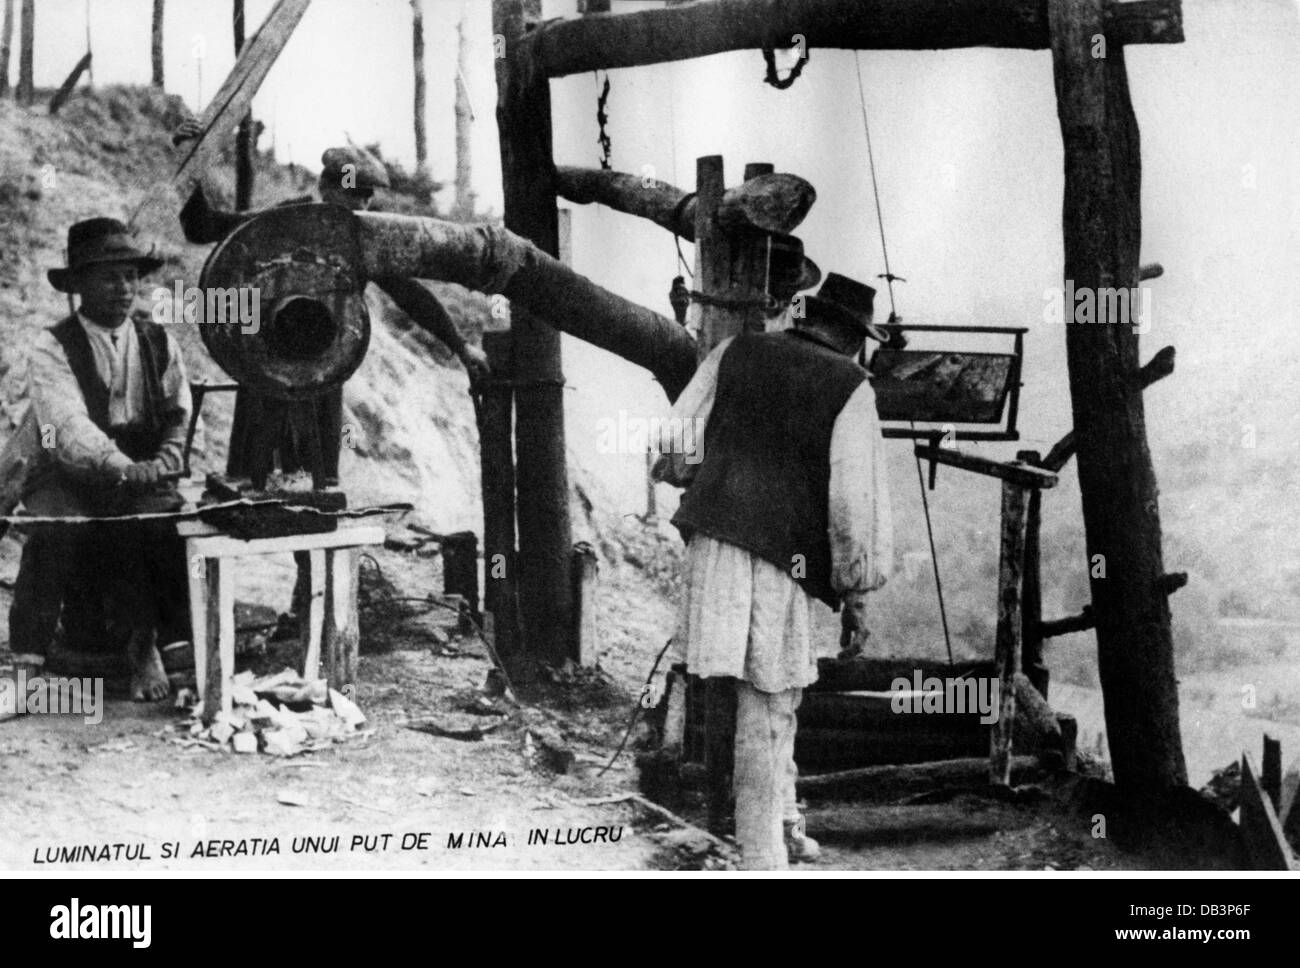 energy,petroleum,driller,near Ploiesti,late 19th century,19th century,Romania,Rumania,oil production,oil production,oil extraction,oil production,raw material,raw materials,crude materials,oil,crude oil,crude naphtha,raw oil,base oil,rock oil,crude petroleum,oil,resource,resources,assign resources,raw material,raw materials,crude materials,tube,tubes,pipeline,pipe line,pipelines,pipe lines,pipeline,oil tube,oil line,oil lines,worker,workers,working,work,works,oil spring,oil well,oil springs,oil wells,historic,his,Additional-Rights-Clearences-Not Available Stock Photo